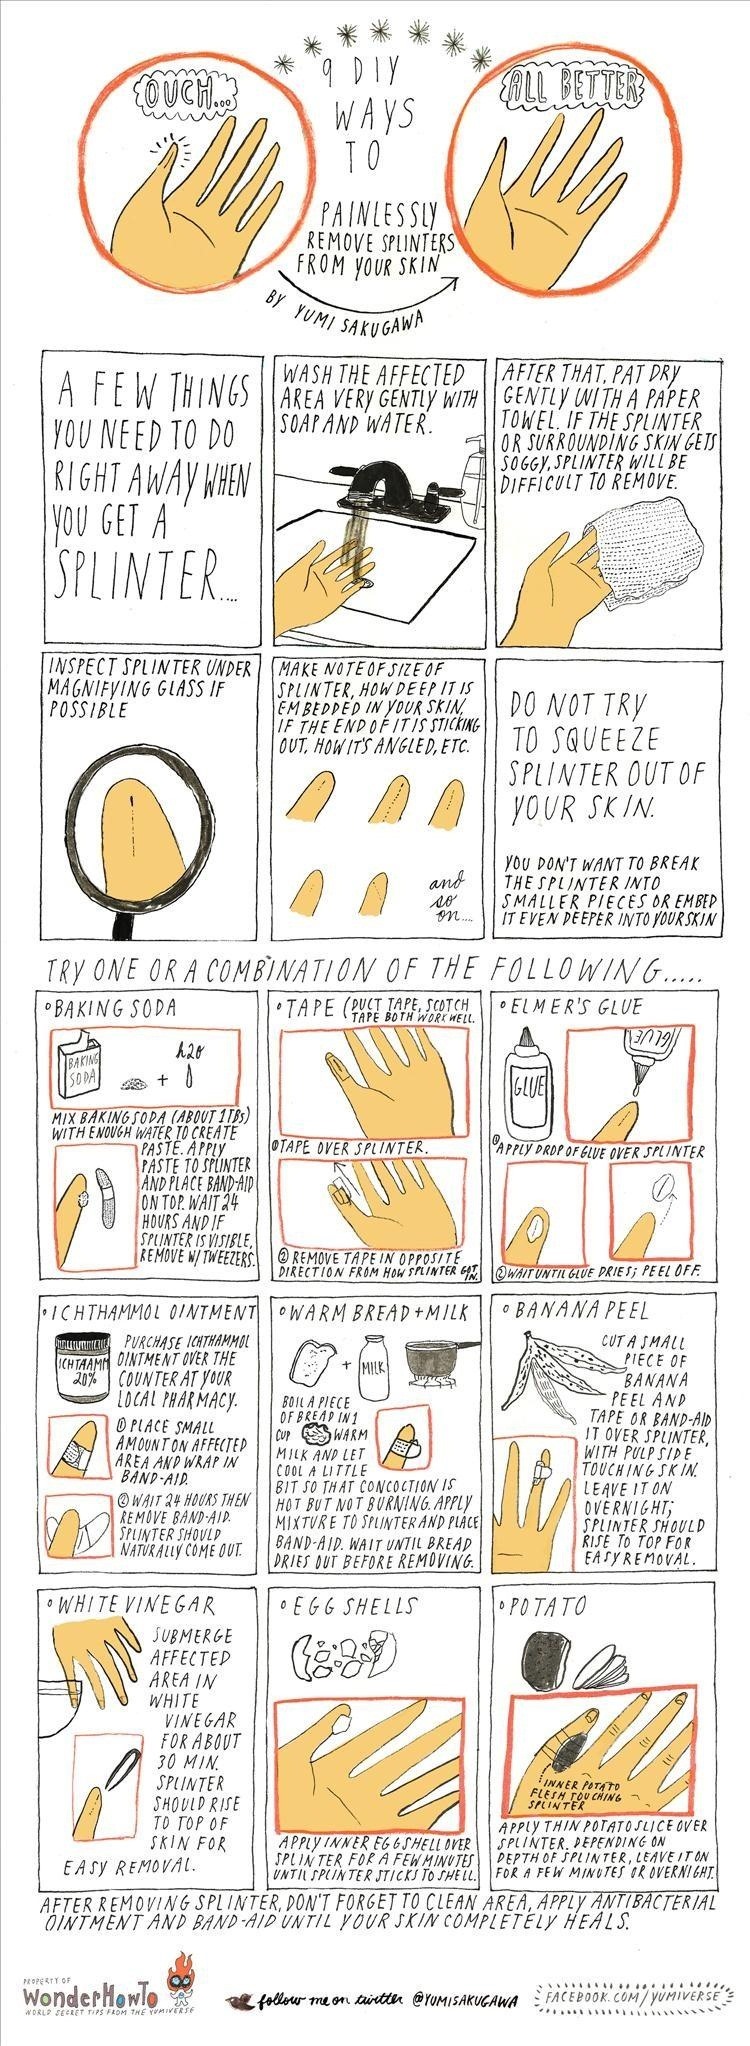 9 DIY Ways to Painlessly Remove Splinters from Your Skin « The Secret  Yumiverse :: WonderHowTo